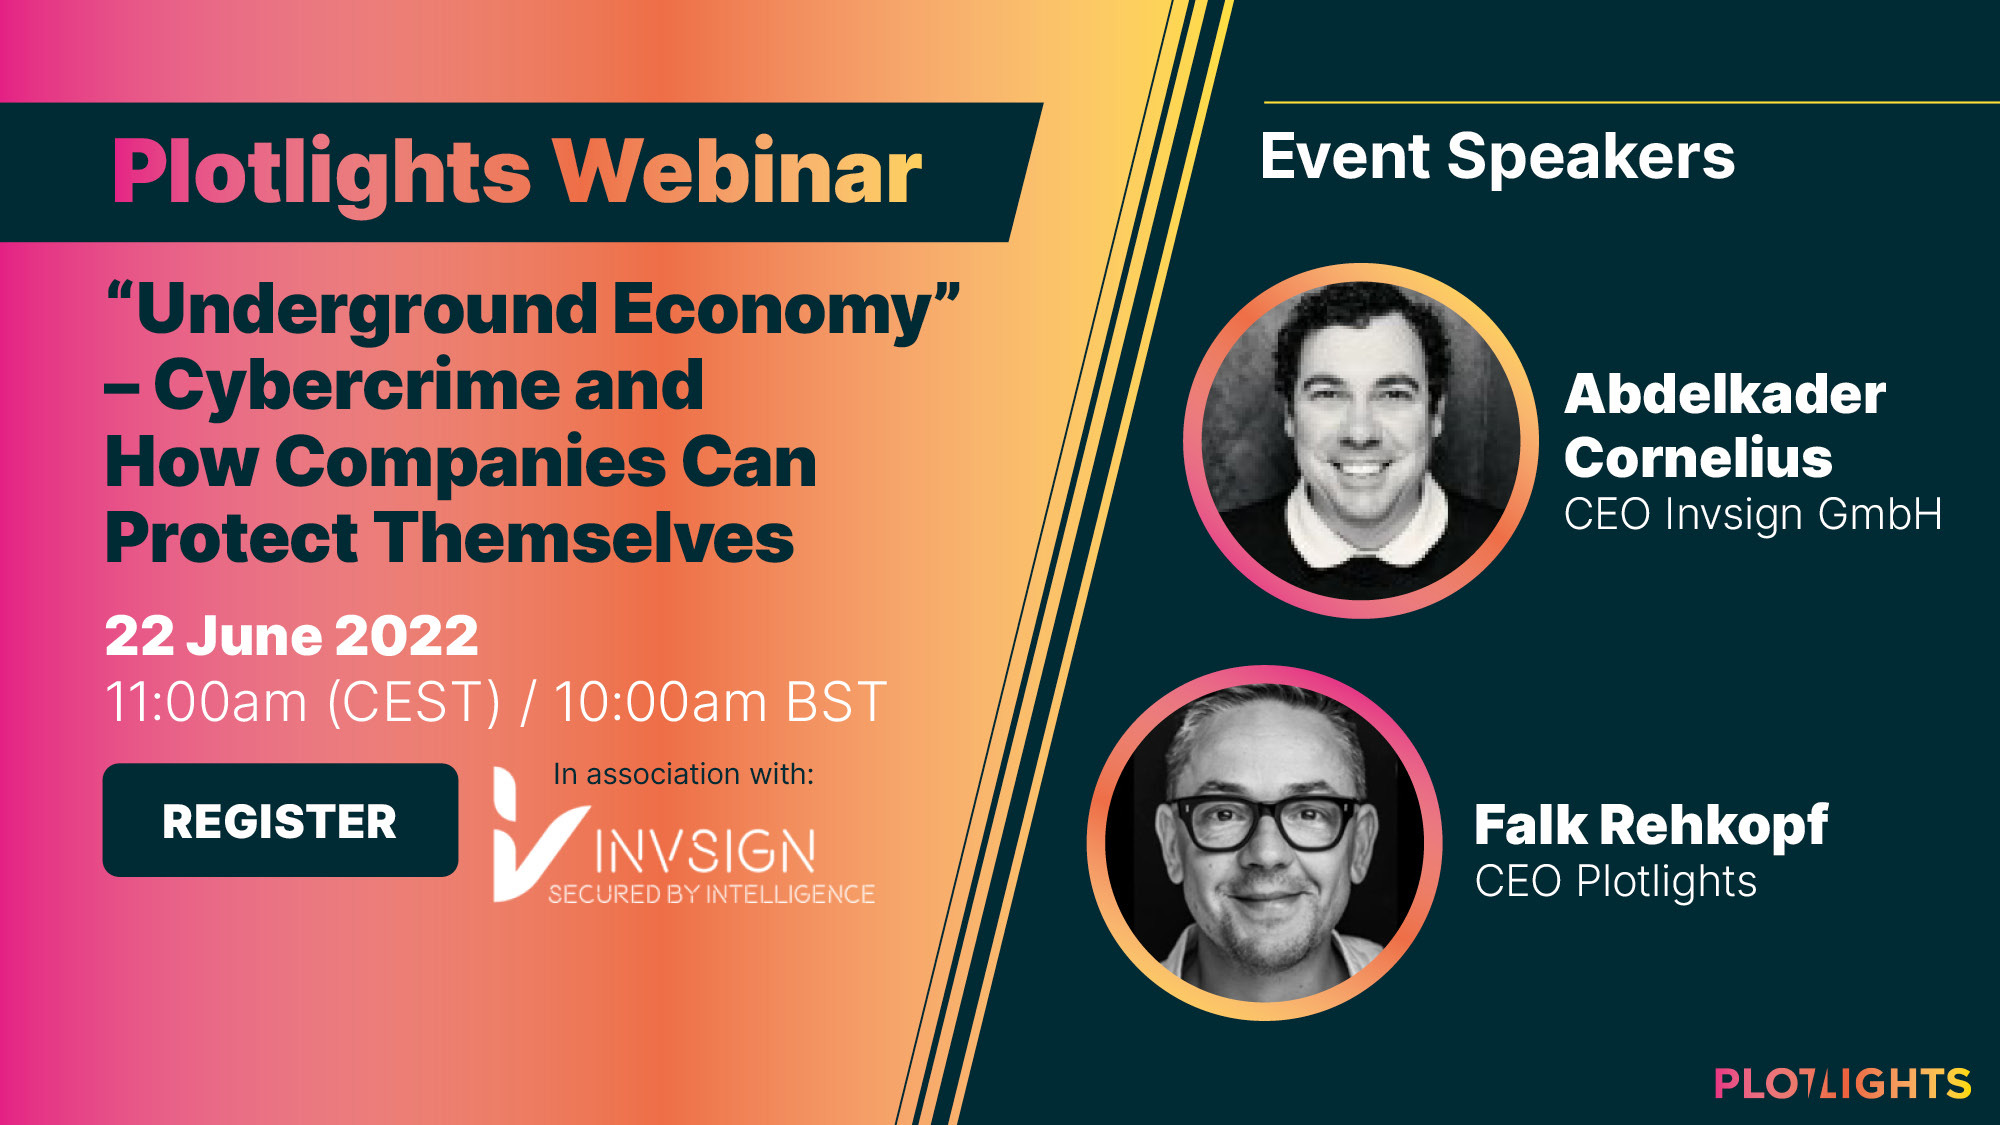 [Webinar] "Underground Economy" - Cybercrime and How Organizations Can Protect Themselves